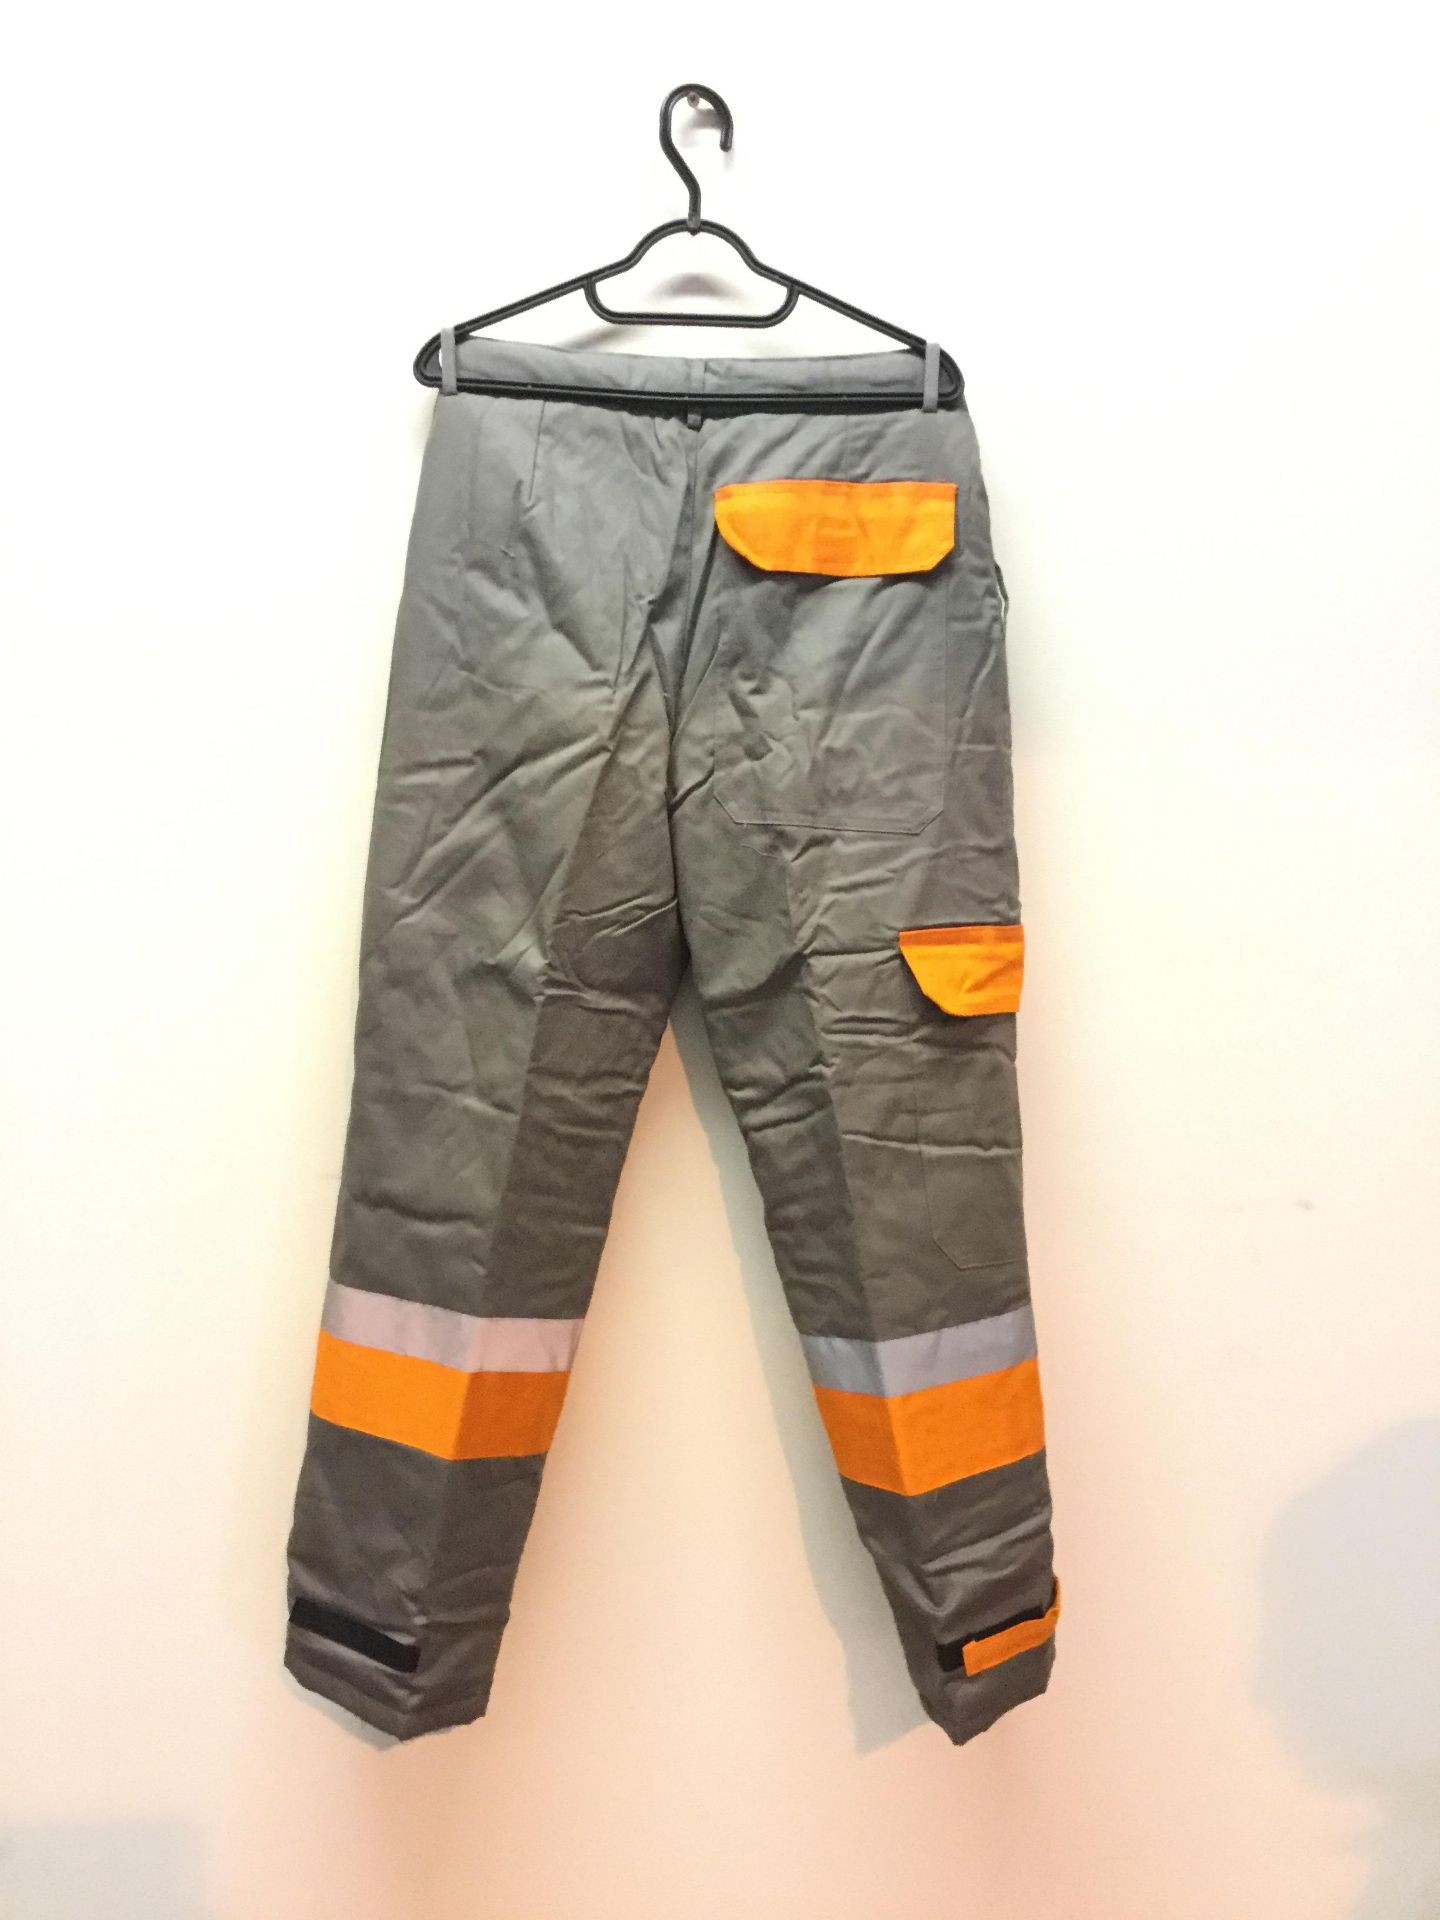 Flame Retardant Winter Trousers - Size 56 - Image 2 of 2